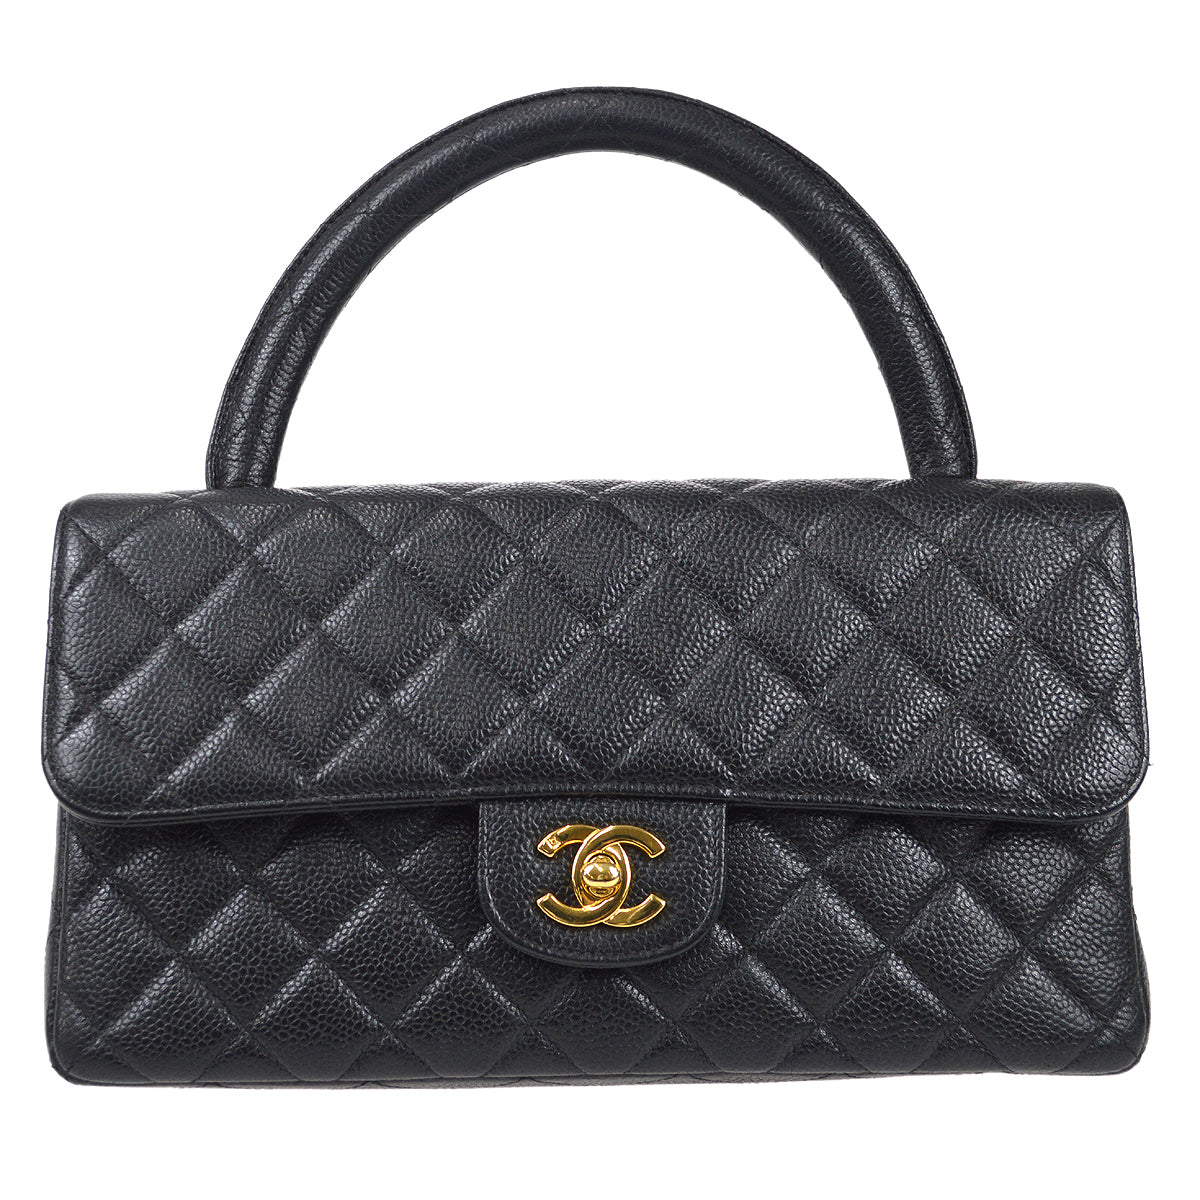 Sell Us Your Chanel Bags Online | The Handbag Clinic